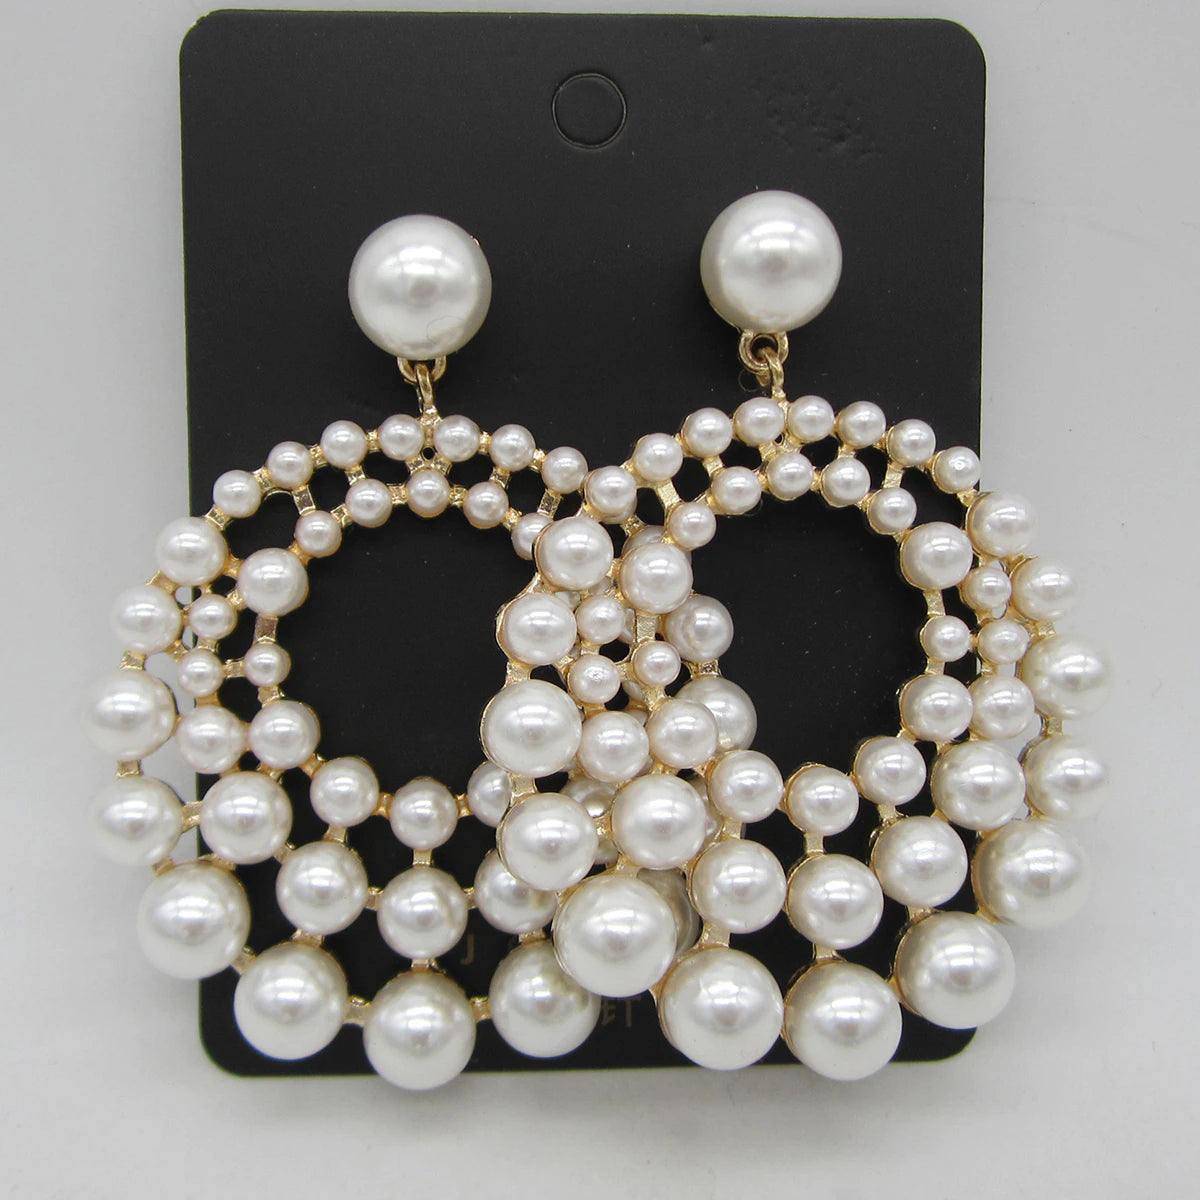 All New Glam Drop Shiny Pearly Beads Earrings Fashion Trendy Chic Jewelry